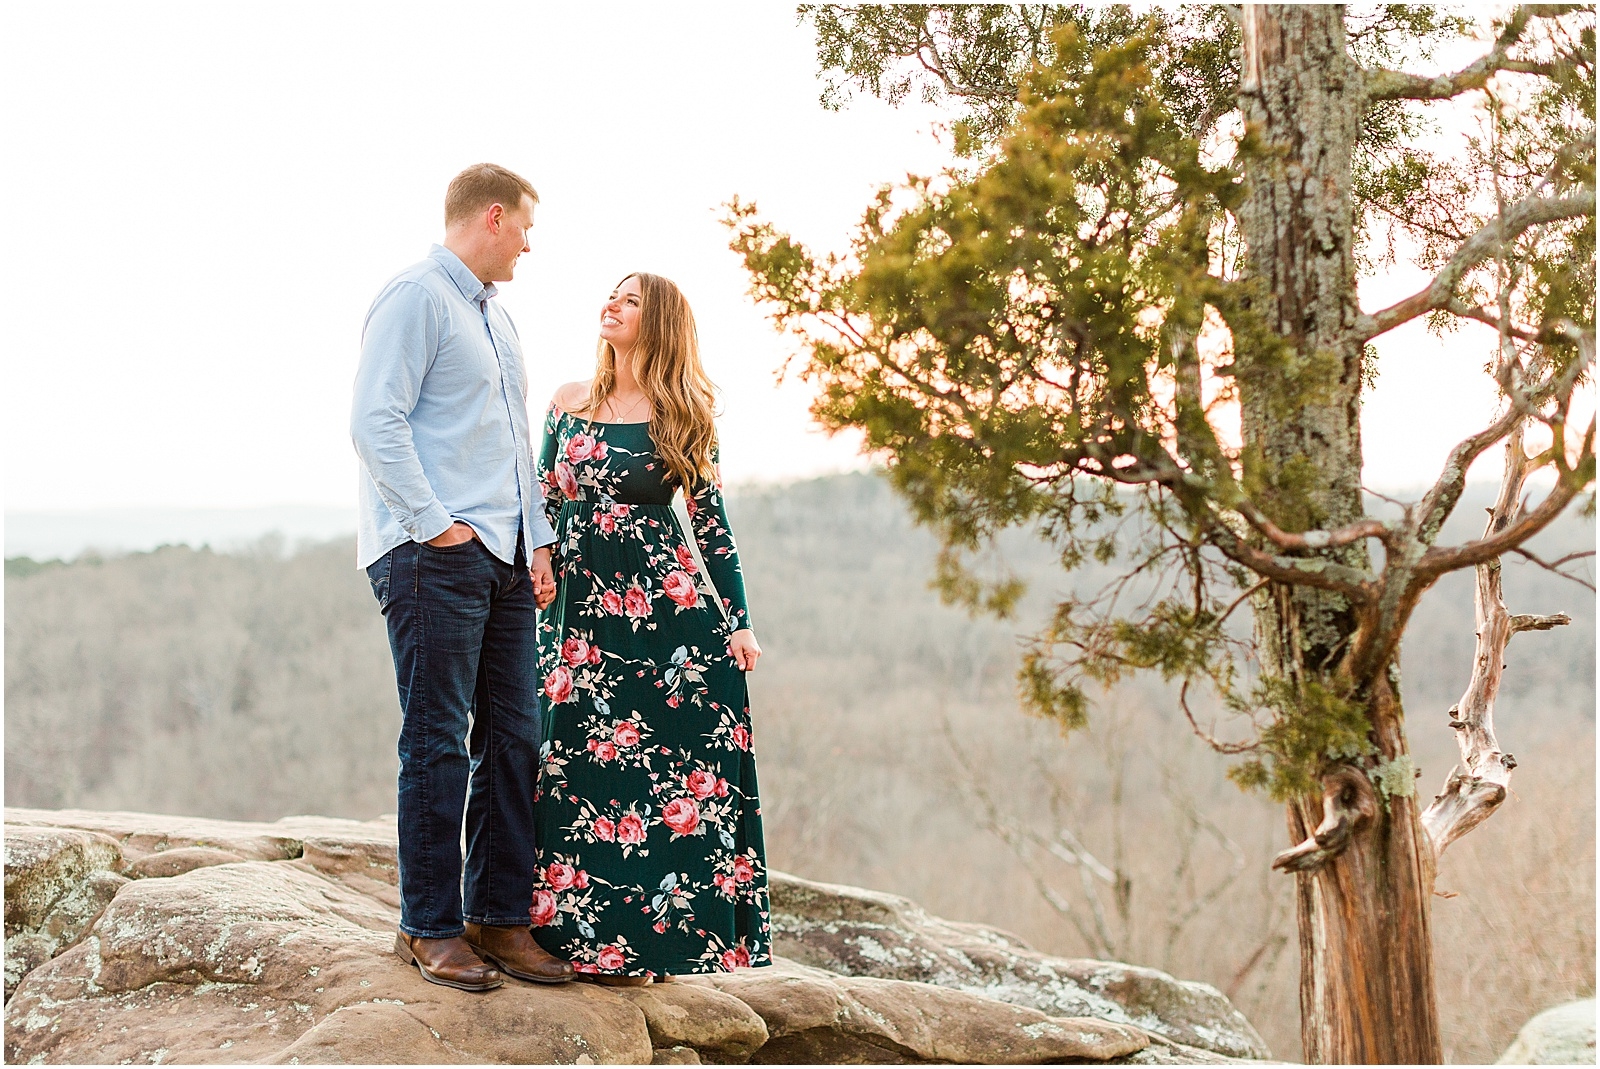 A Sunny Garden of the Gods Engagement Session | Shiloh and Lee | Bret and Brandie Photography095.jpg